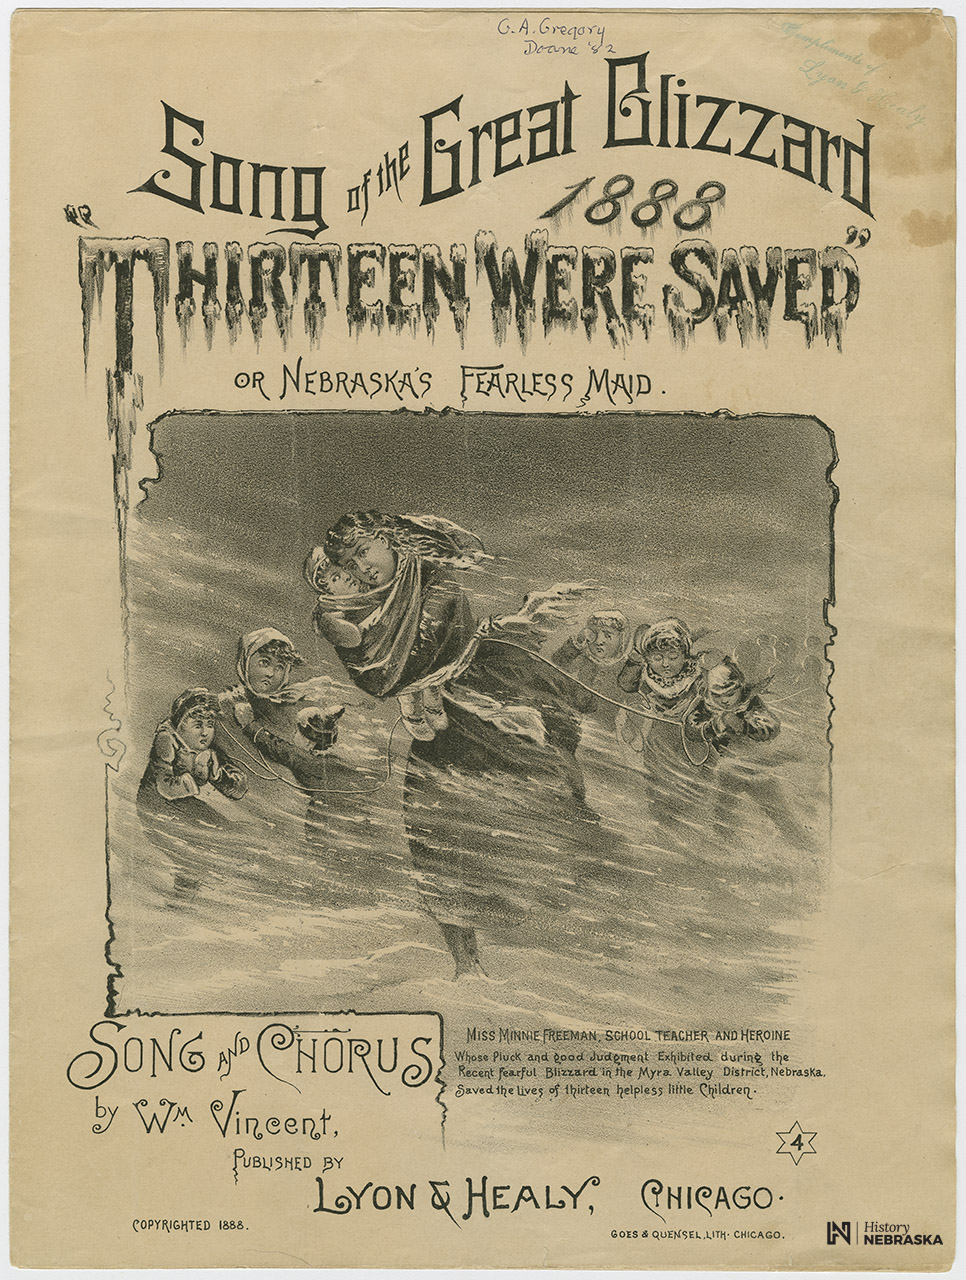 Illustrated cover for sheet music about the Blizzard of 1888